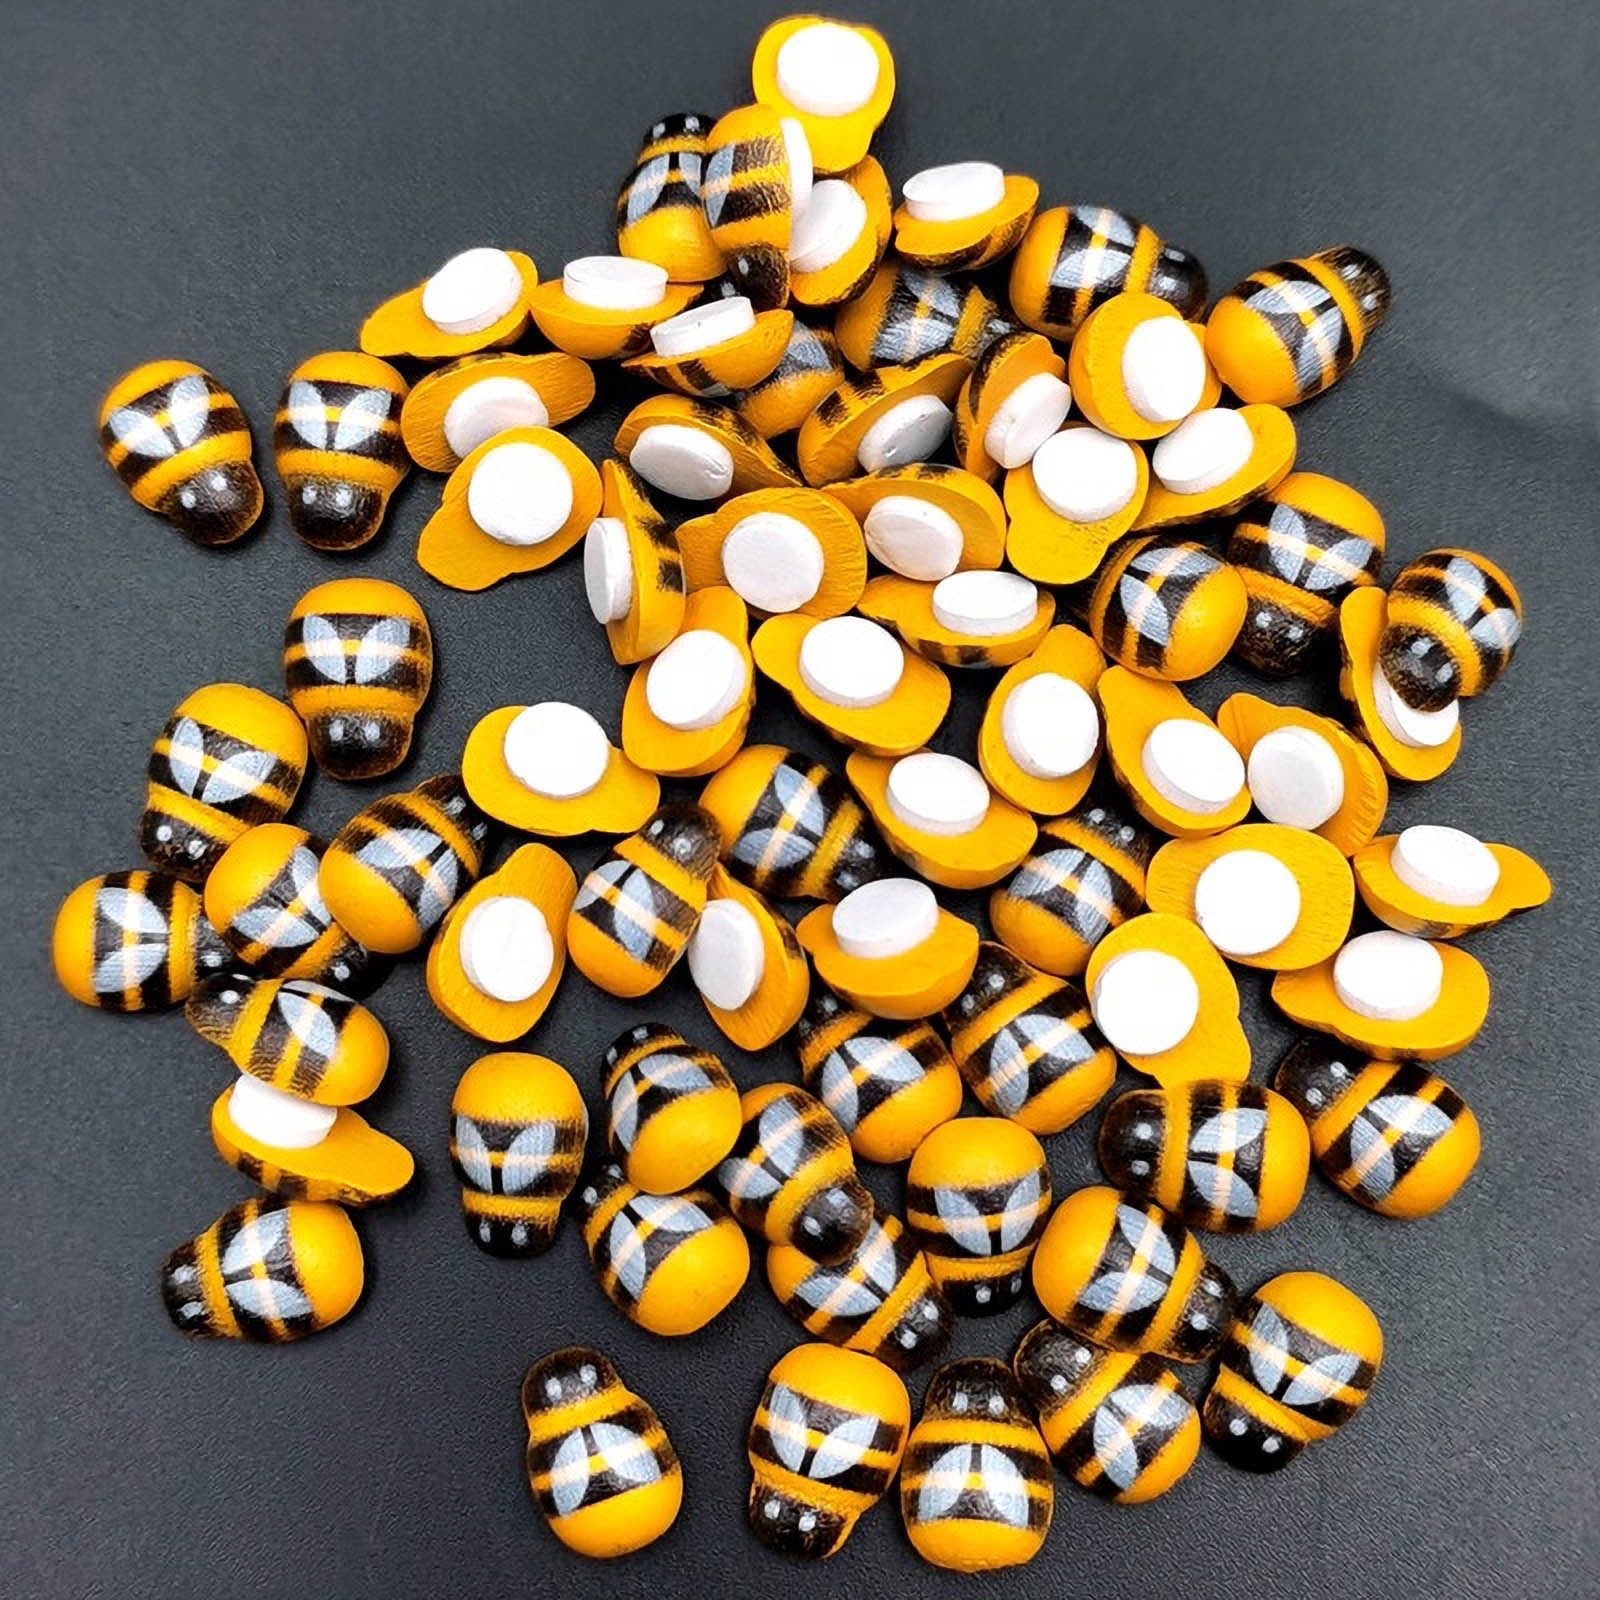 HADDIY Tiny Craft Bees,50 Pcs Small Plastic Resin Bumble Bee Decor for Embellishments and Bee Themed Birthday Party Table Decoration